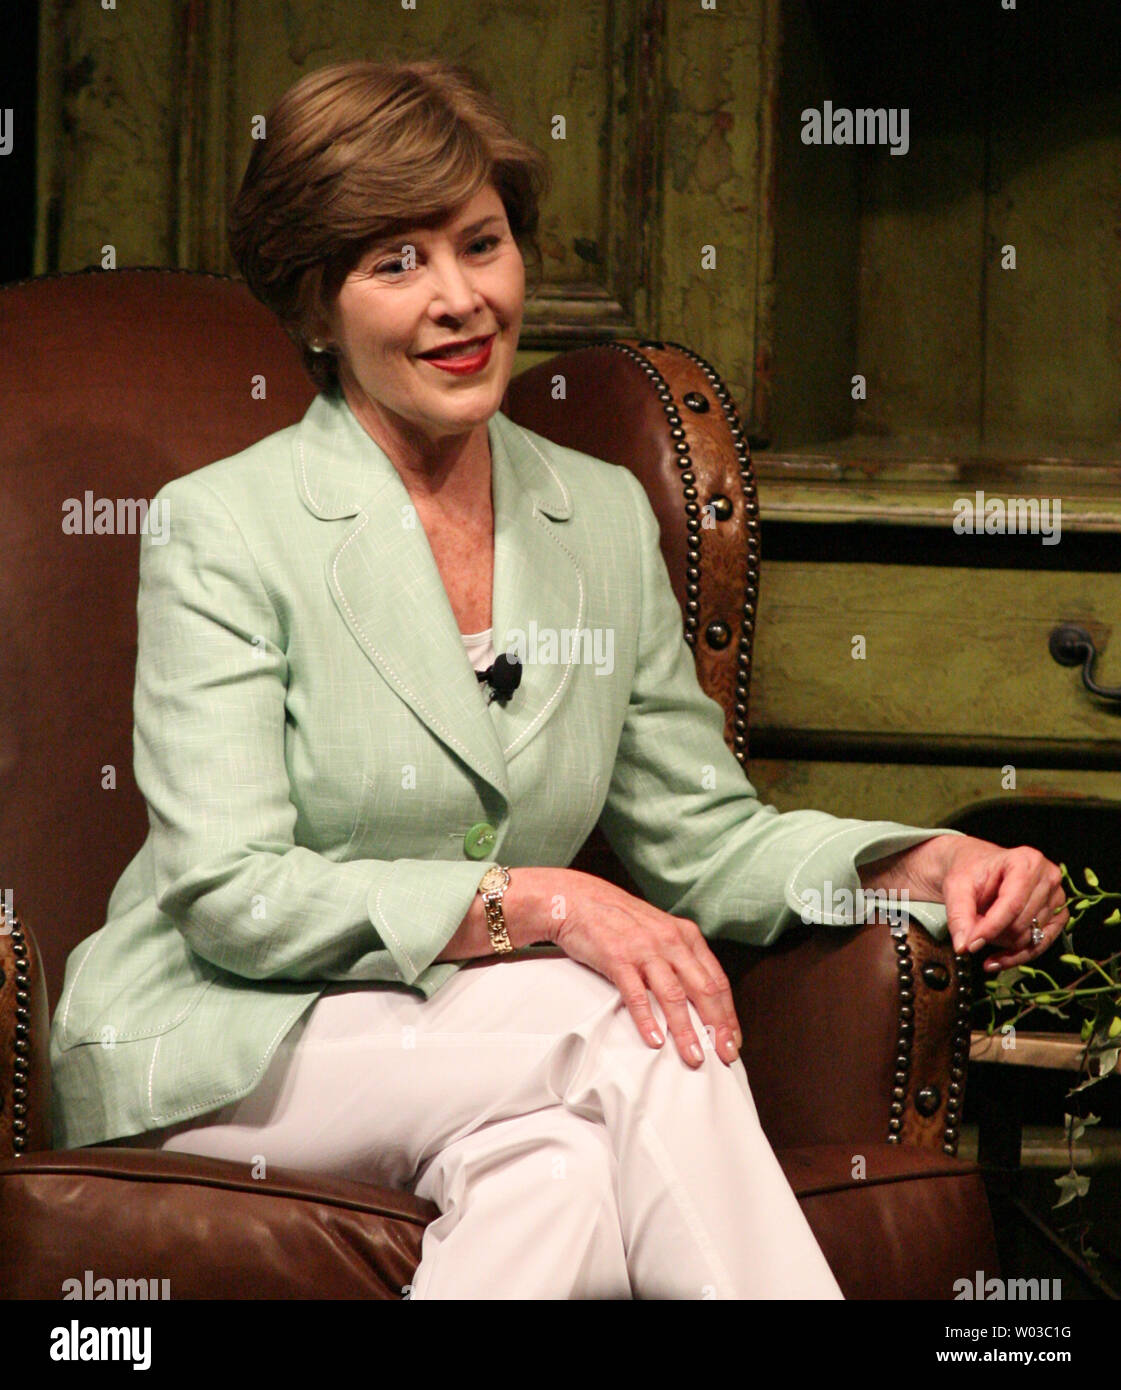 First Lady Laura Bush participates in an interview during the Sandra Day O'Conner Awards Luncheon at the Arizona Biltmore Resort and Spa in Phoenix on May 25, 2007.  (UPI Photo/Art Foxall) Stock Photo